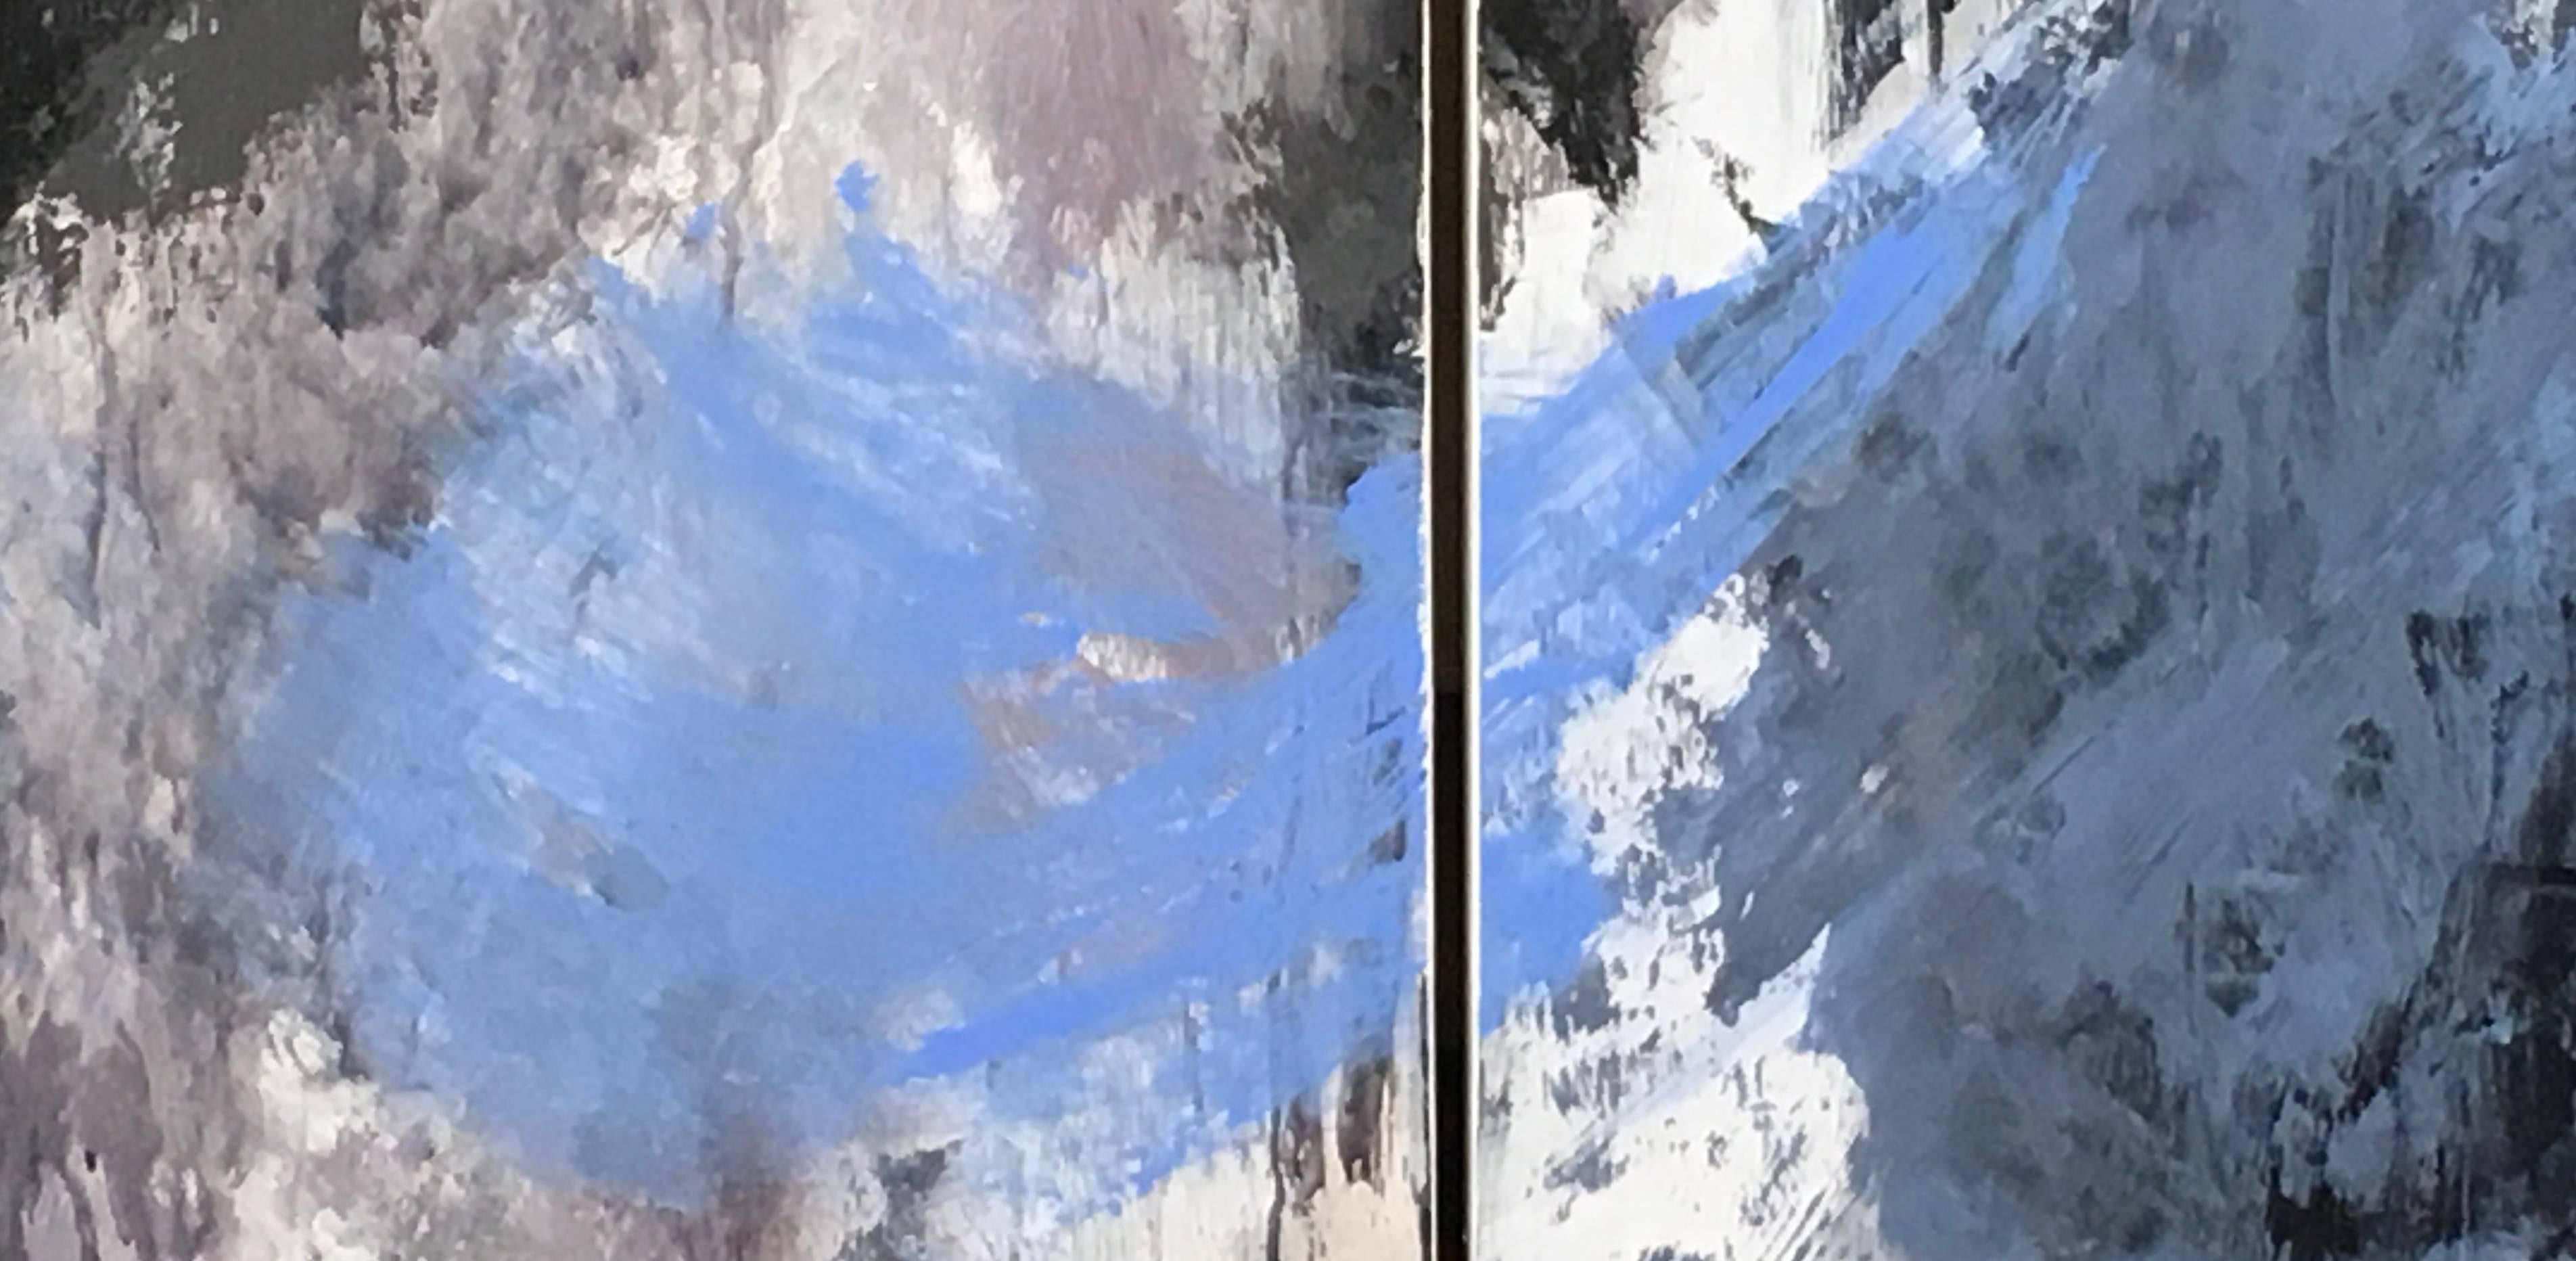 Europa 24 & 25 is an abstract diptych, acrylic on wood panel, by California artist, Stephanie Cate.  It is 52x54.   It is filled with shades of Blue, white and gray.   

Stephanie Cate is an emerging abstract painter based out of Los Angeles,